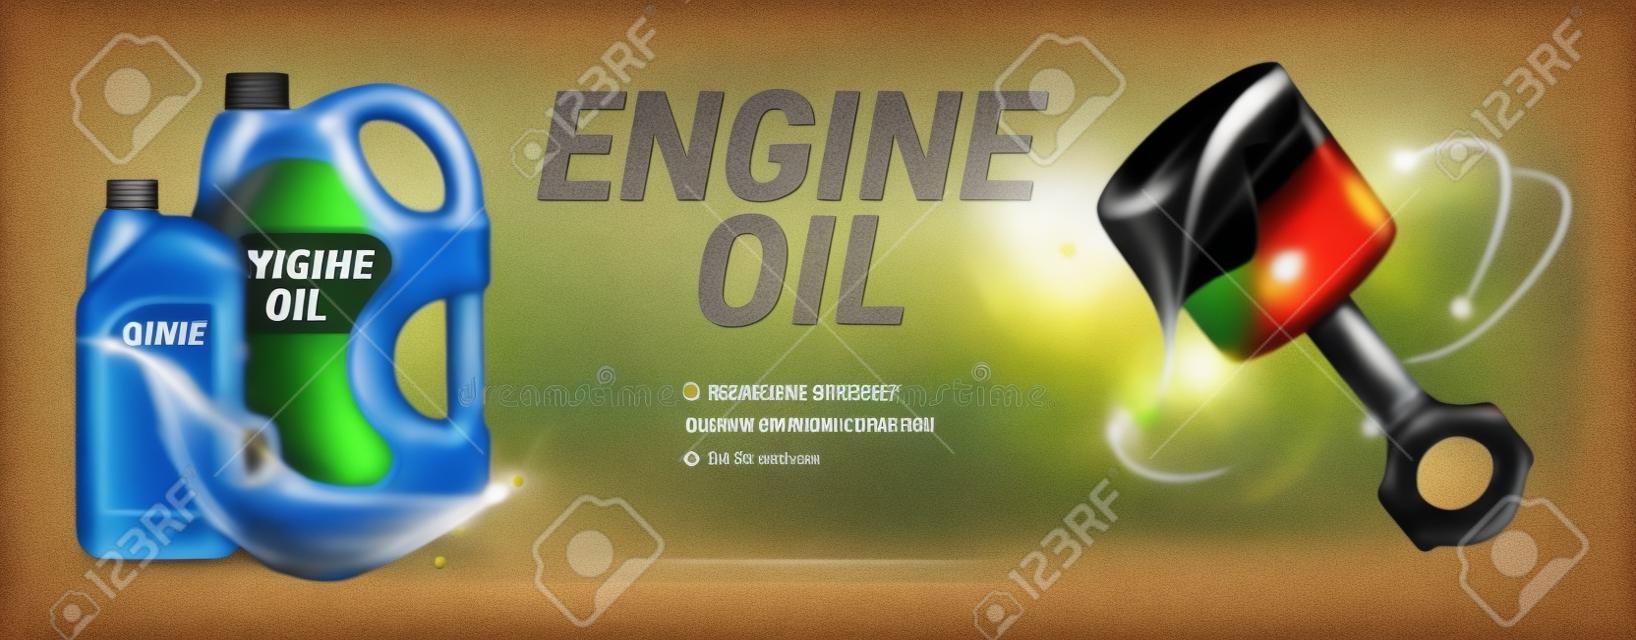 High quality engine oil advertising horizontal  poster with description of properties realistic vector illustration